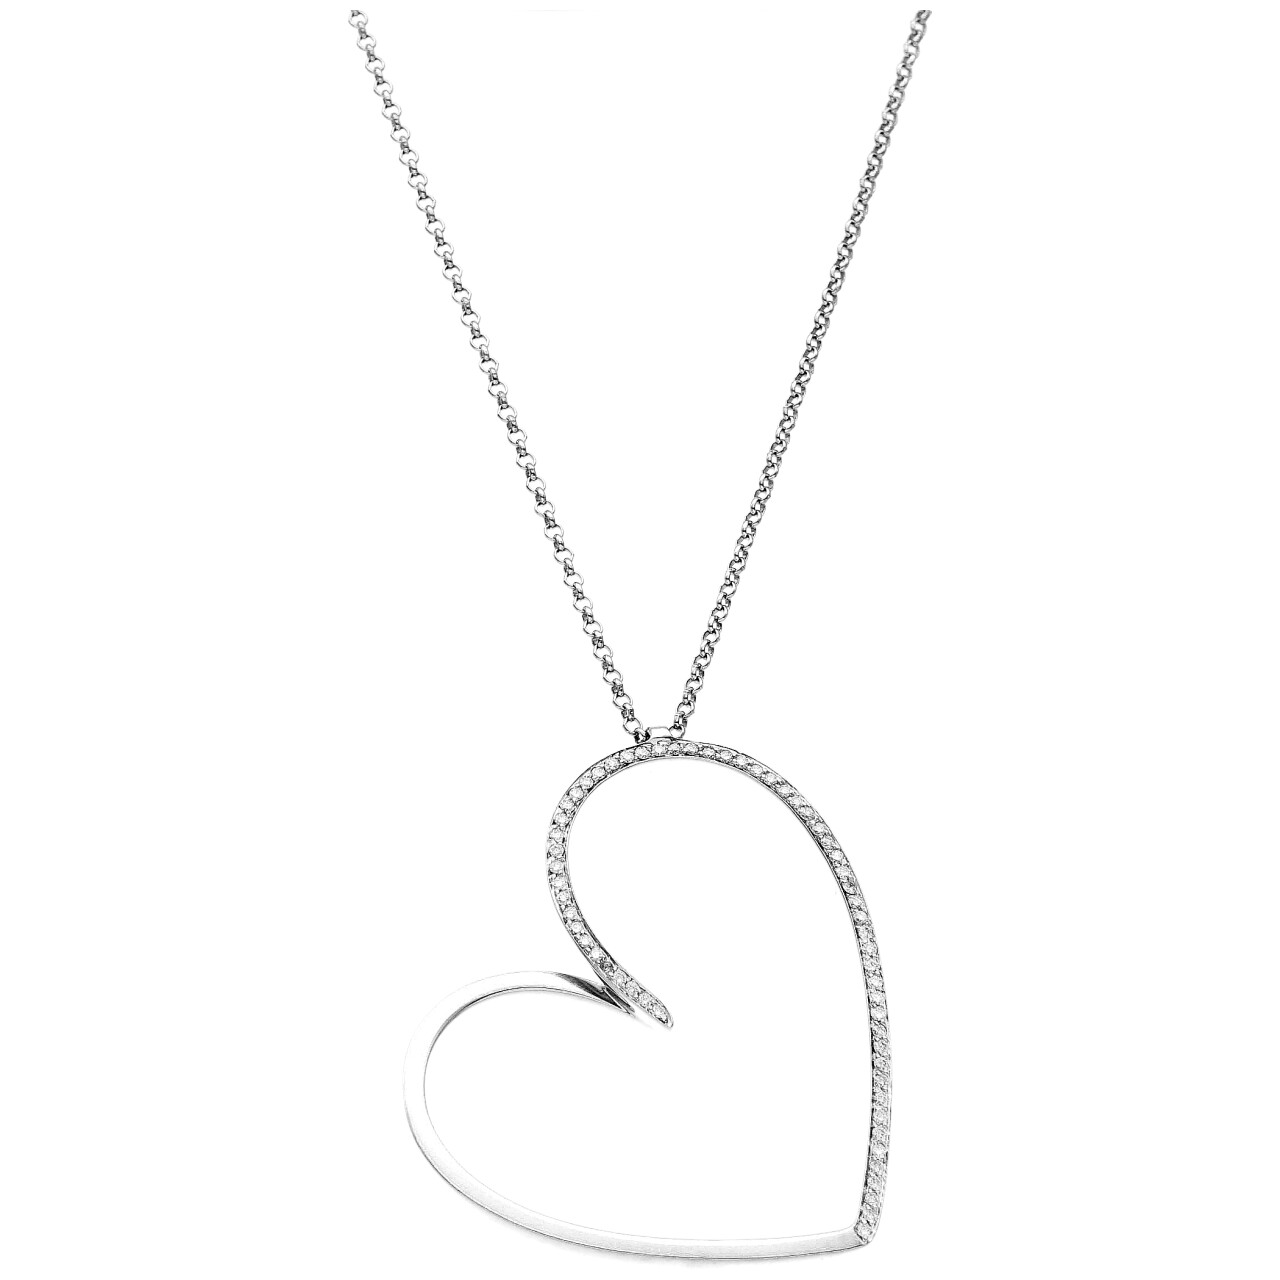 White gold necklace with heart pendant 0.32 ct. diamonds